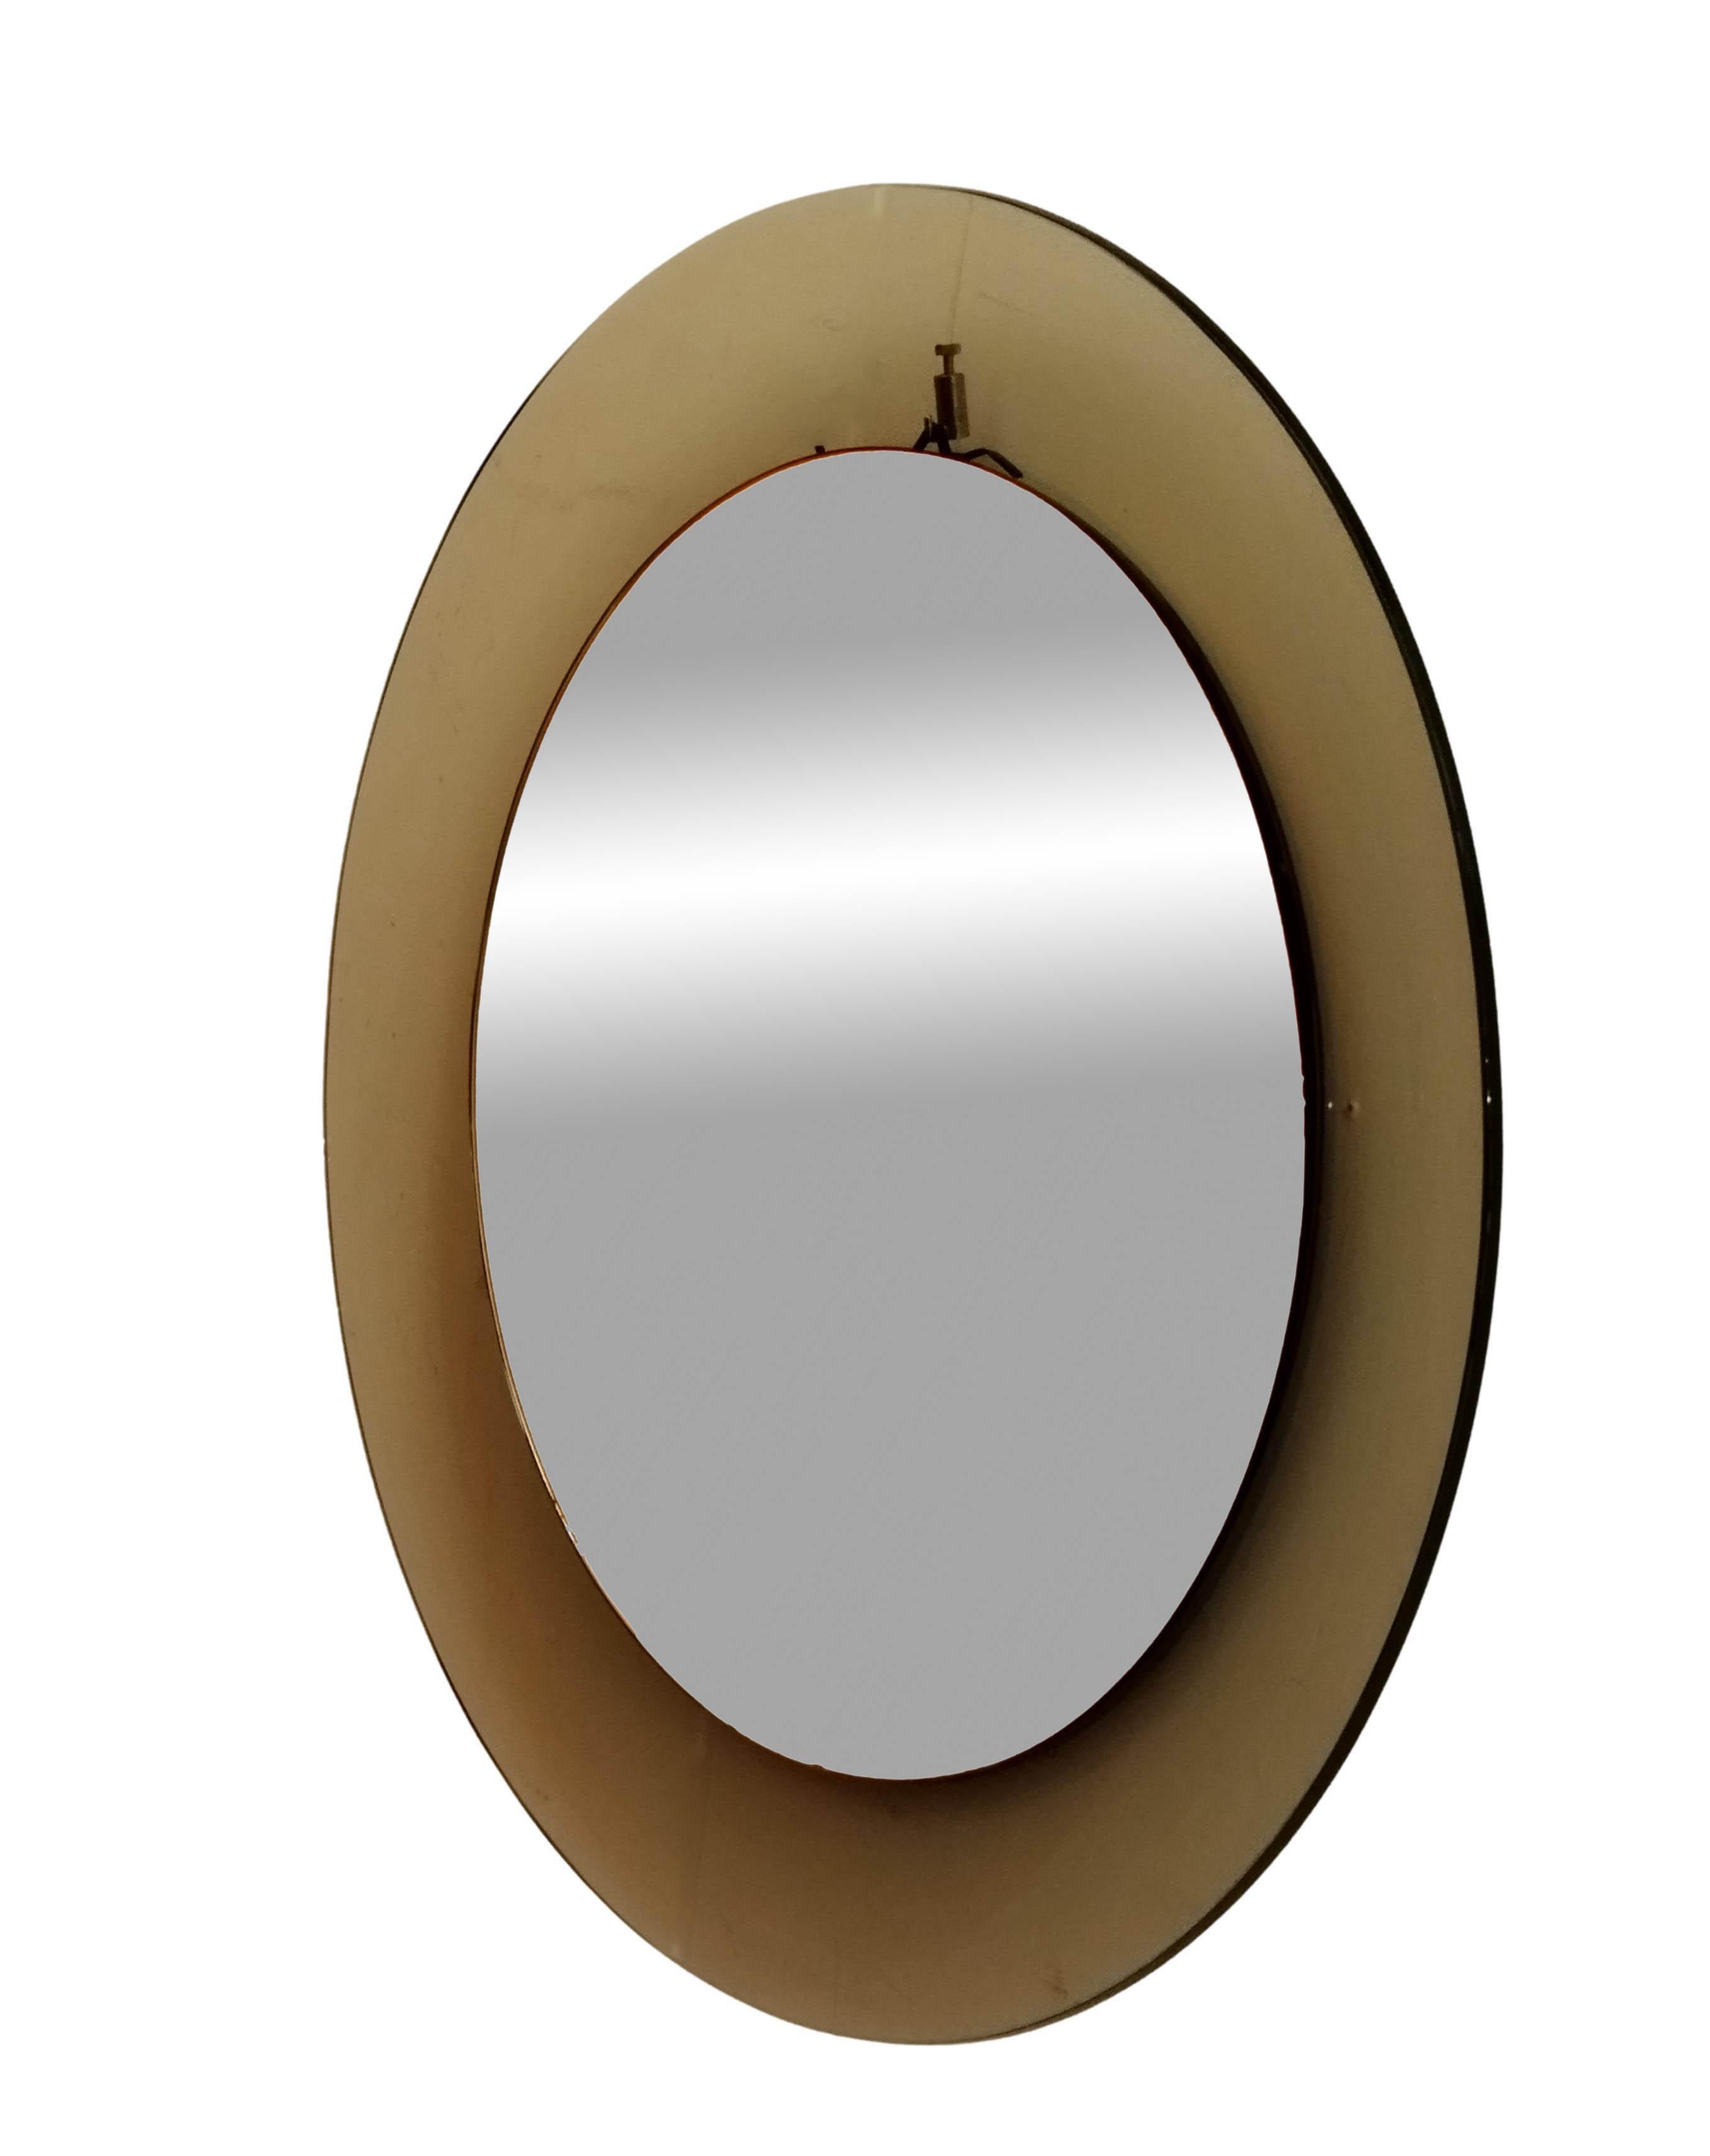 Circular Murano glass wall mirror, Prod. Cristal Art, Italy circa 1960, amber concave shaped glass, mirror glass, wooden suspension. Very good state of preservation. 


